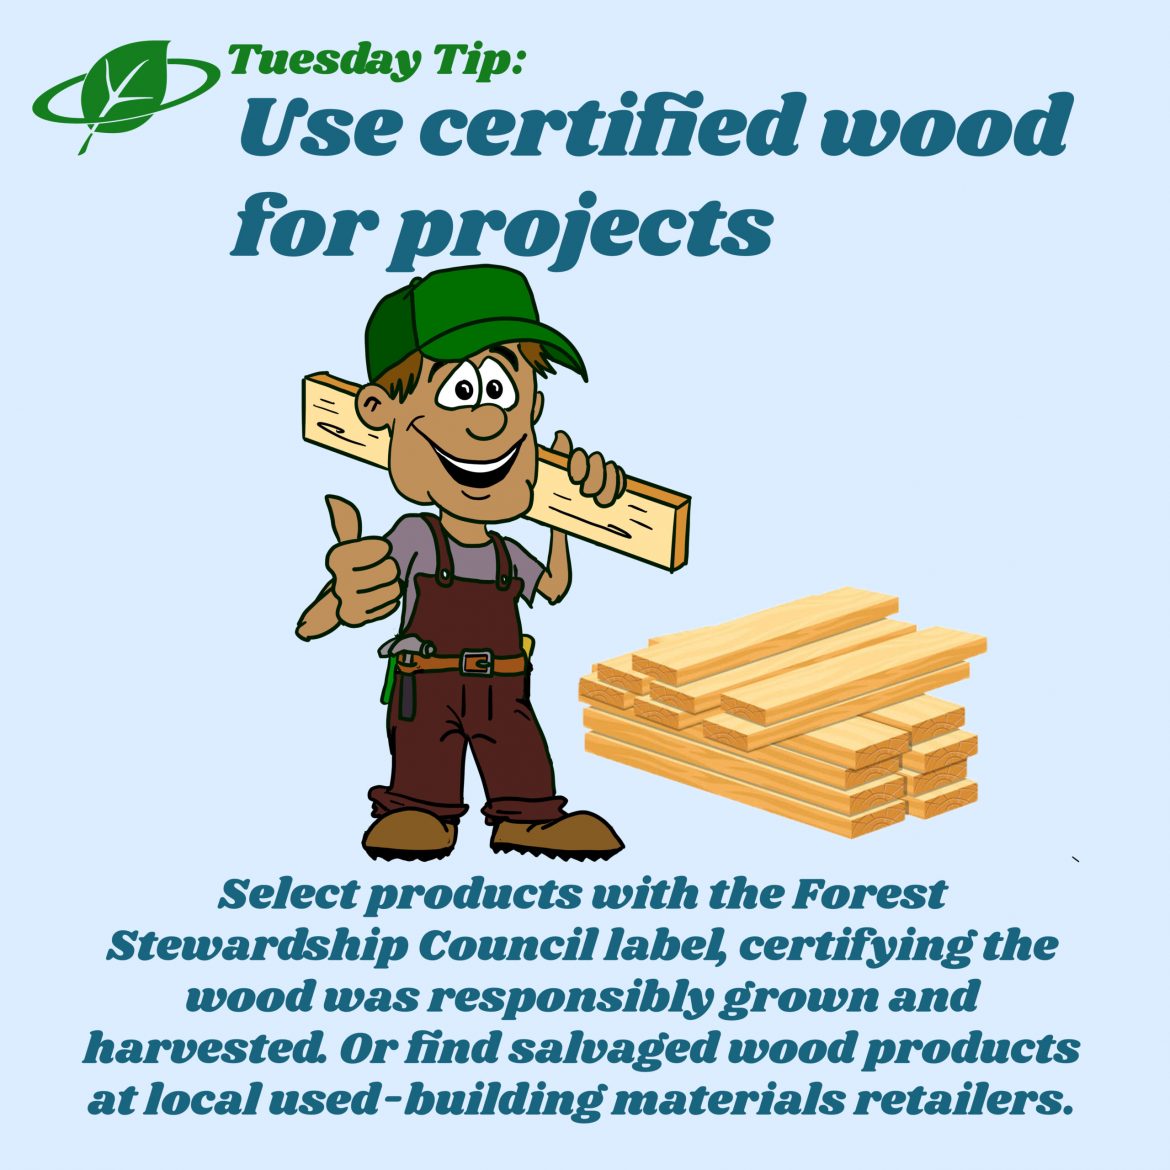 Use certified wood for projects | Tuesday Tip